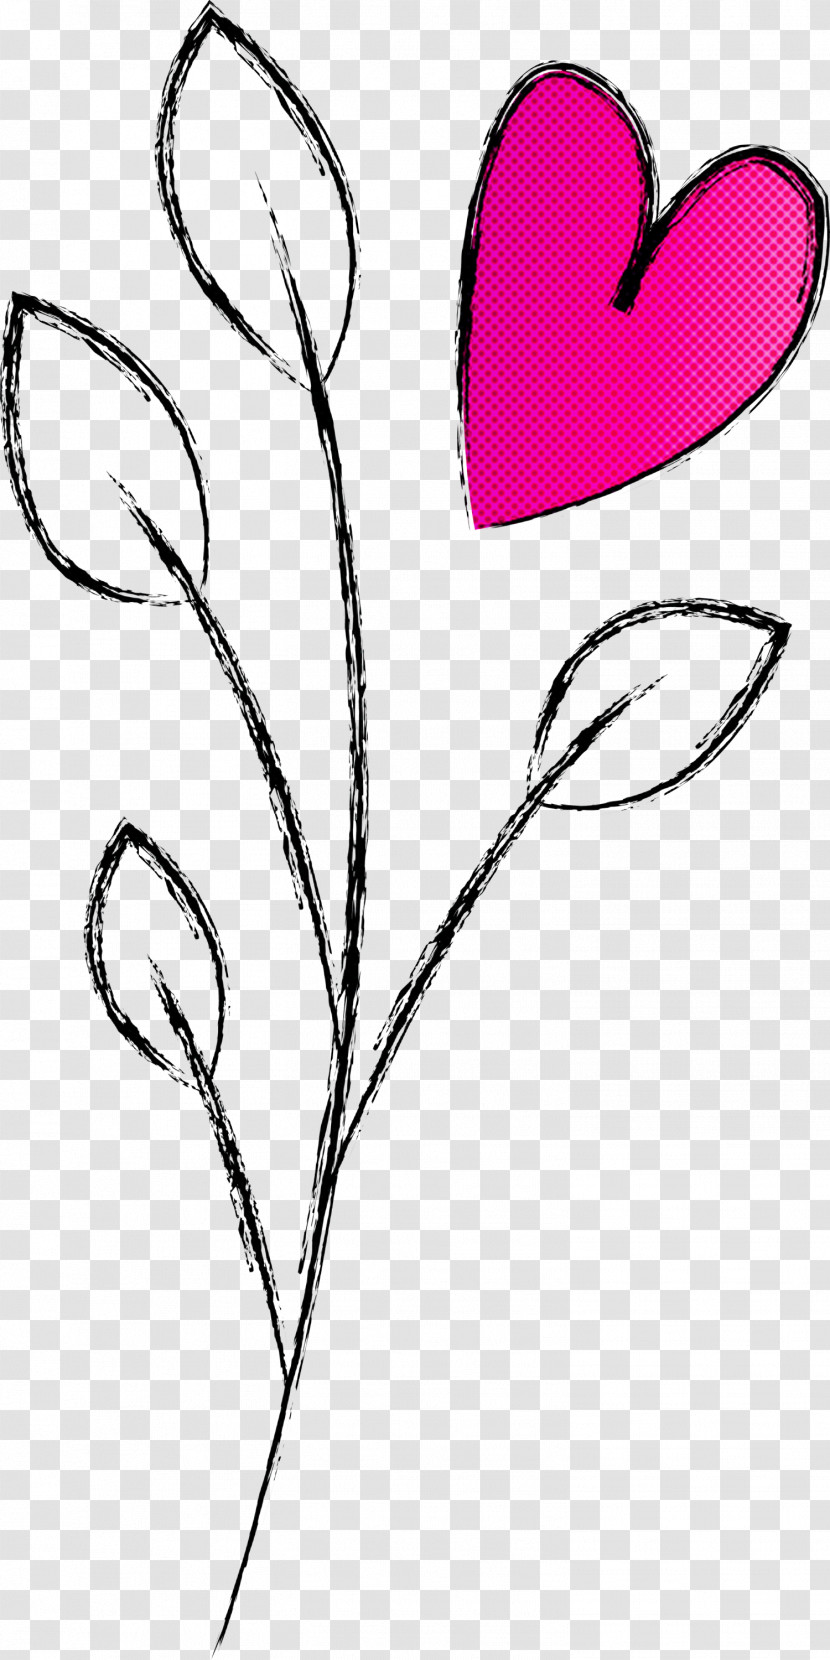 Valentines Day Happy Valentines Day Pink Heart Transparent PNG